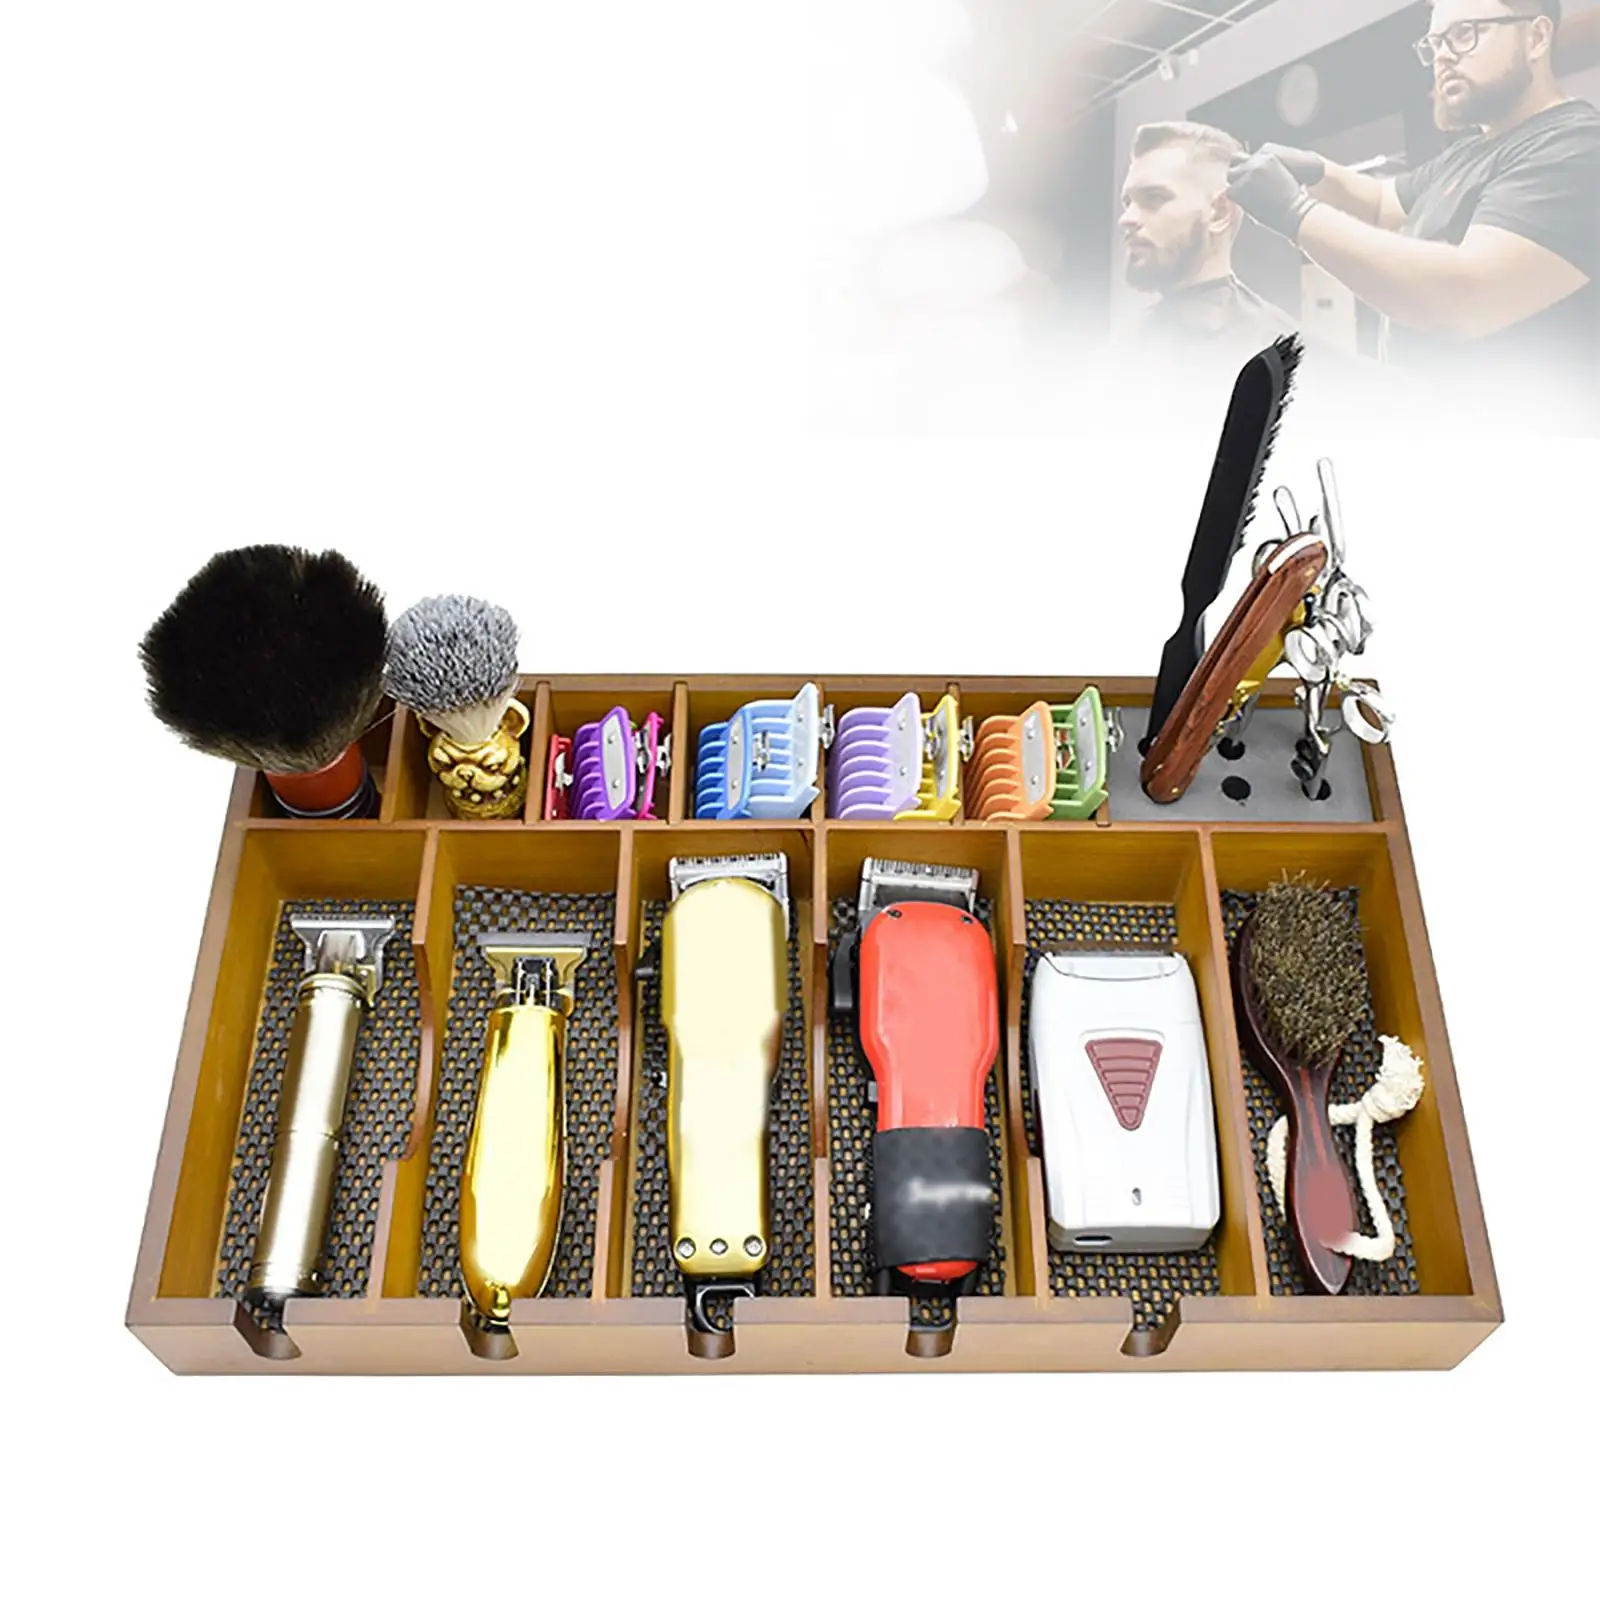 Hair Styling Tools Organizer Combs Clips Scissors Stand Shear Holder for Hair Salon Storage Rack for Barber Hairdresser Groomer